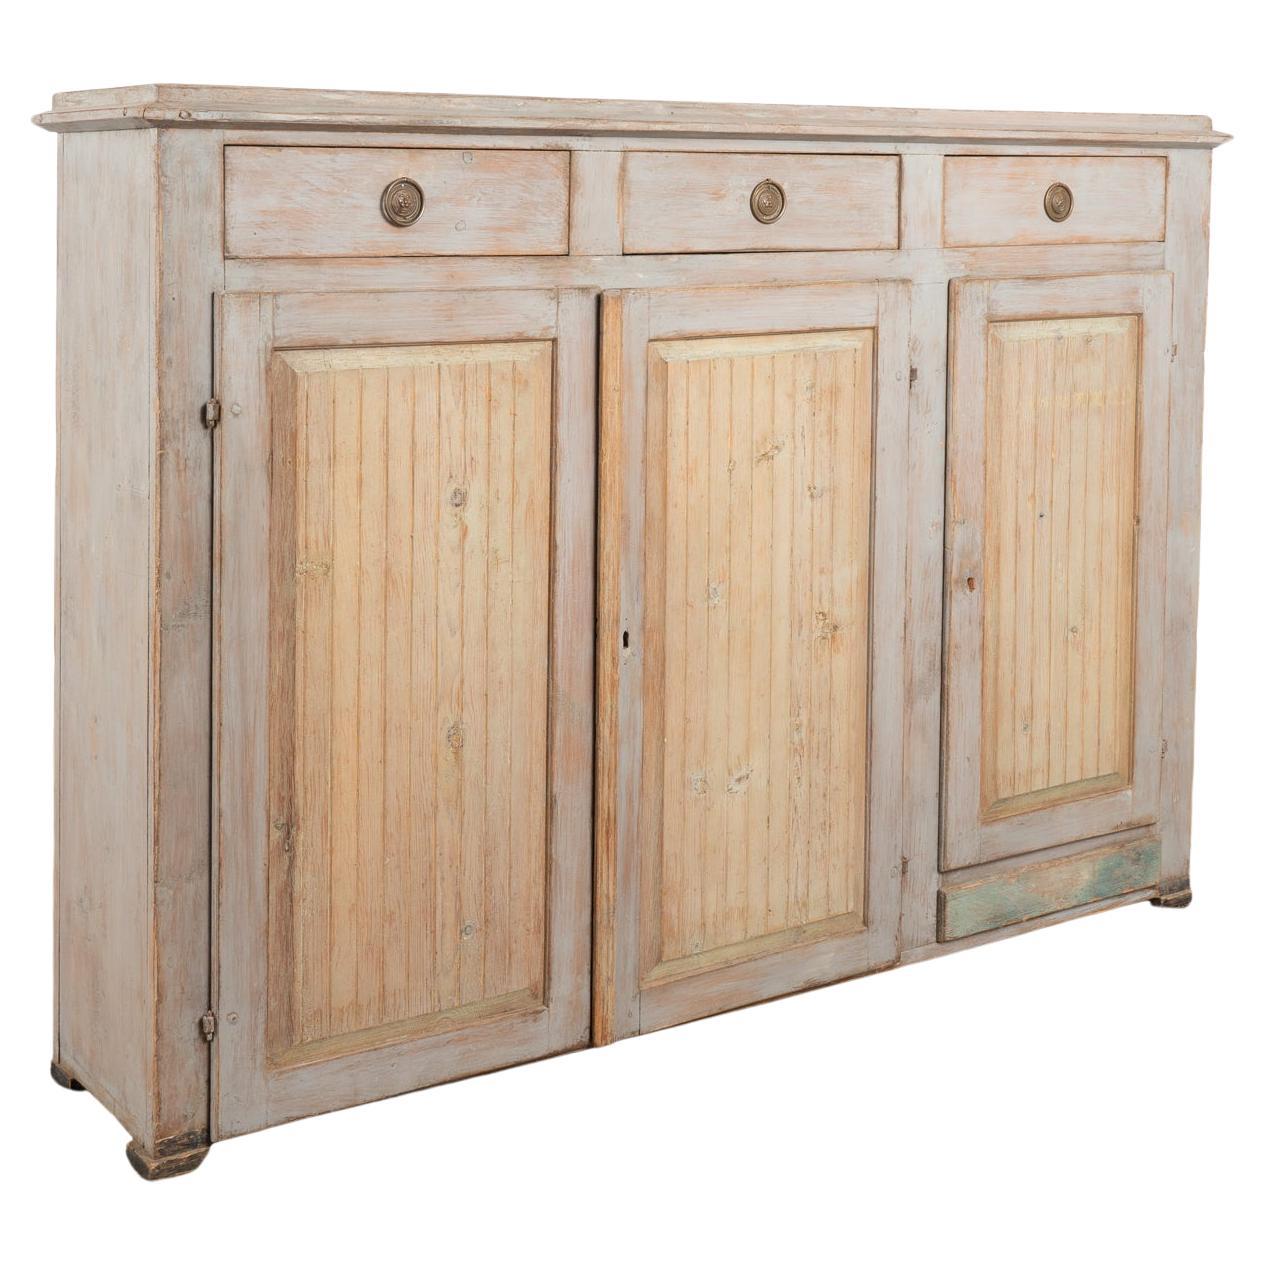 Narrow Original Painted Swedish Sideboard Console, circa 1820-40 For Sale